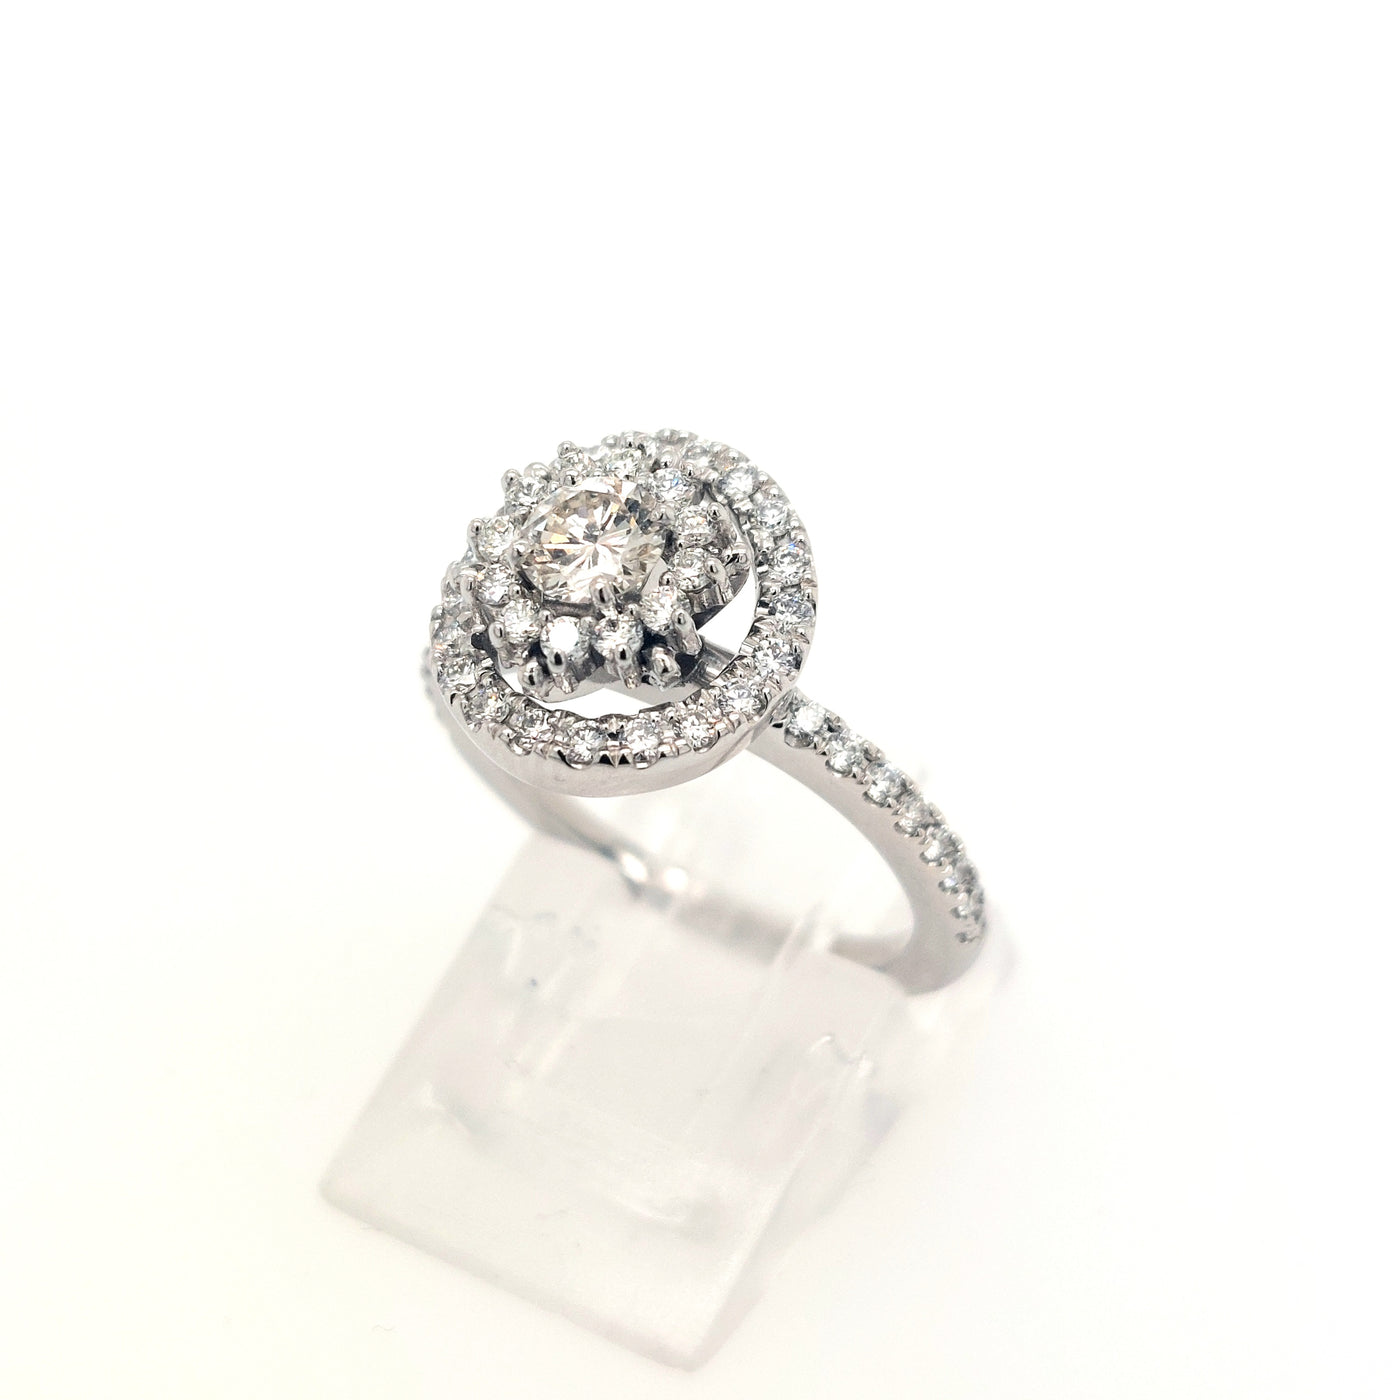 14KW .71ctTW H-K/VS2-SI3 Double Halo Diamond Ring Size:5.25 Gram Weight:4.8gr